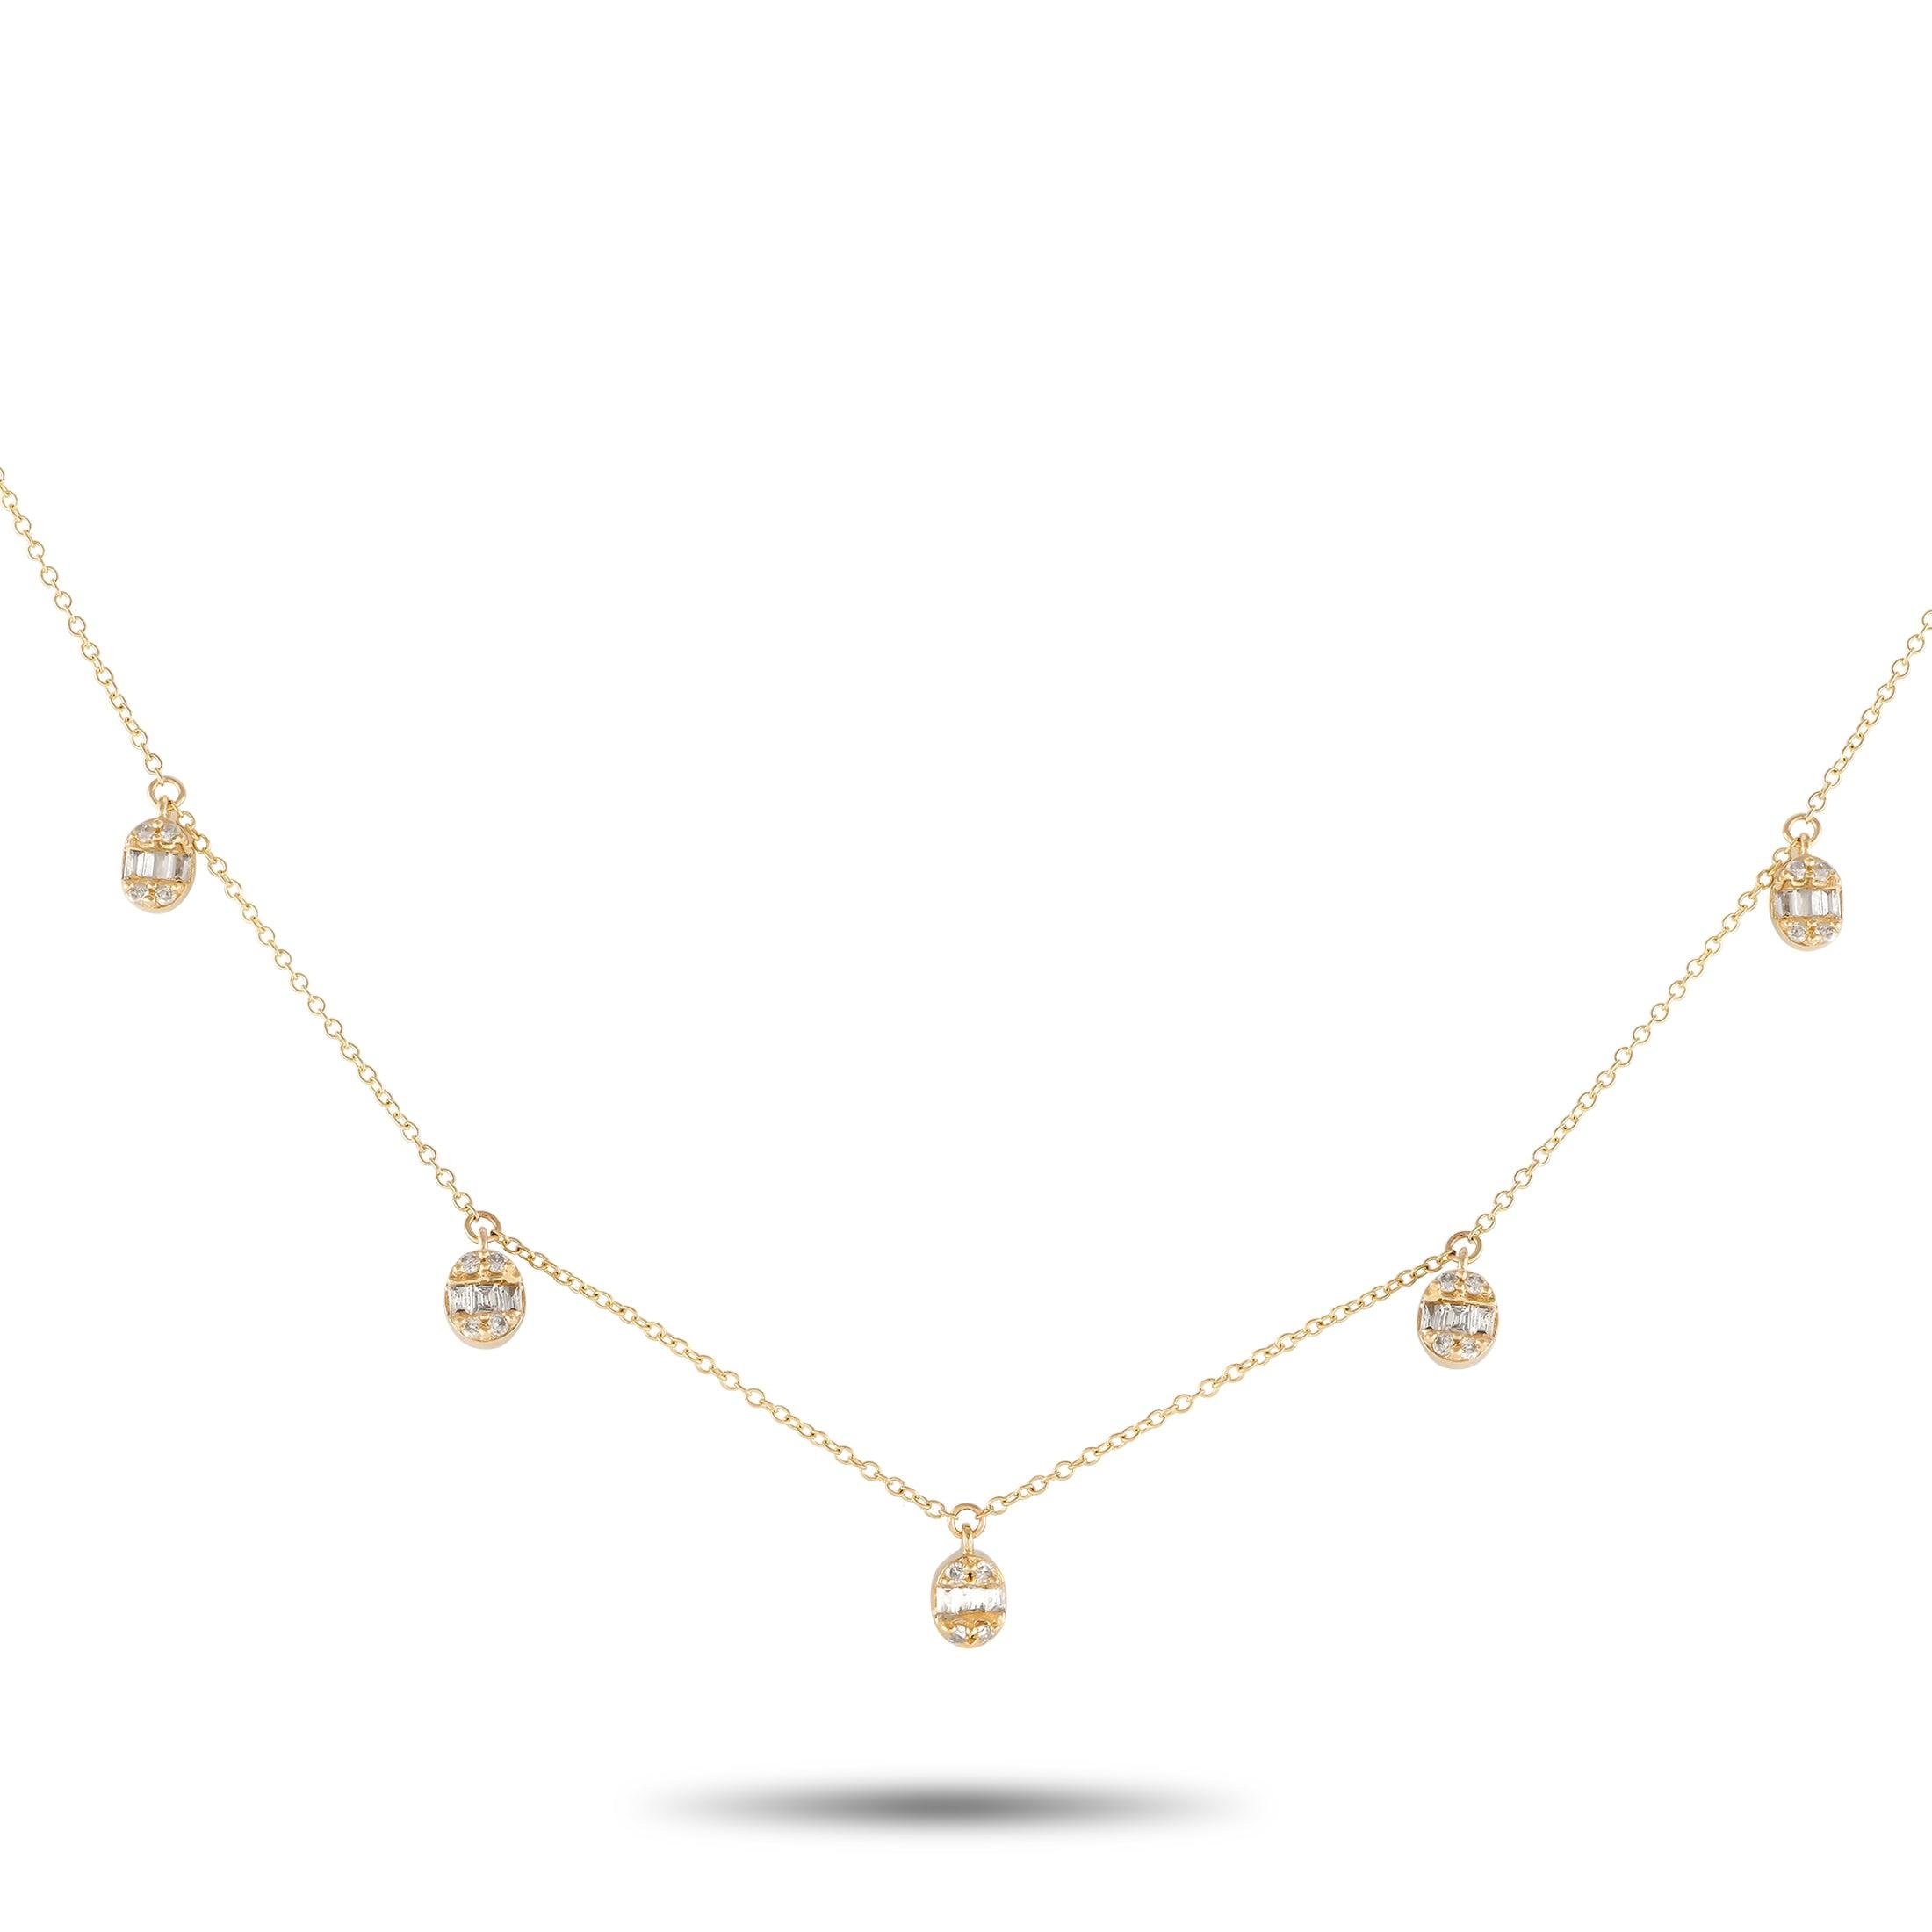 LB Exclusive 14K Yellow Gold 0.35ct Diamond Station Necklace NK01595-Y by NON BRANDED